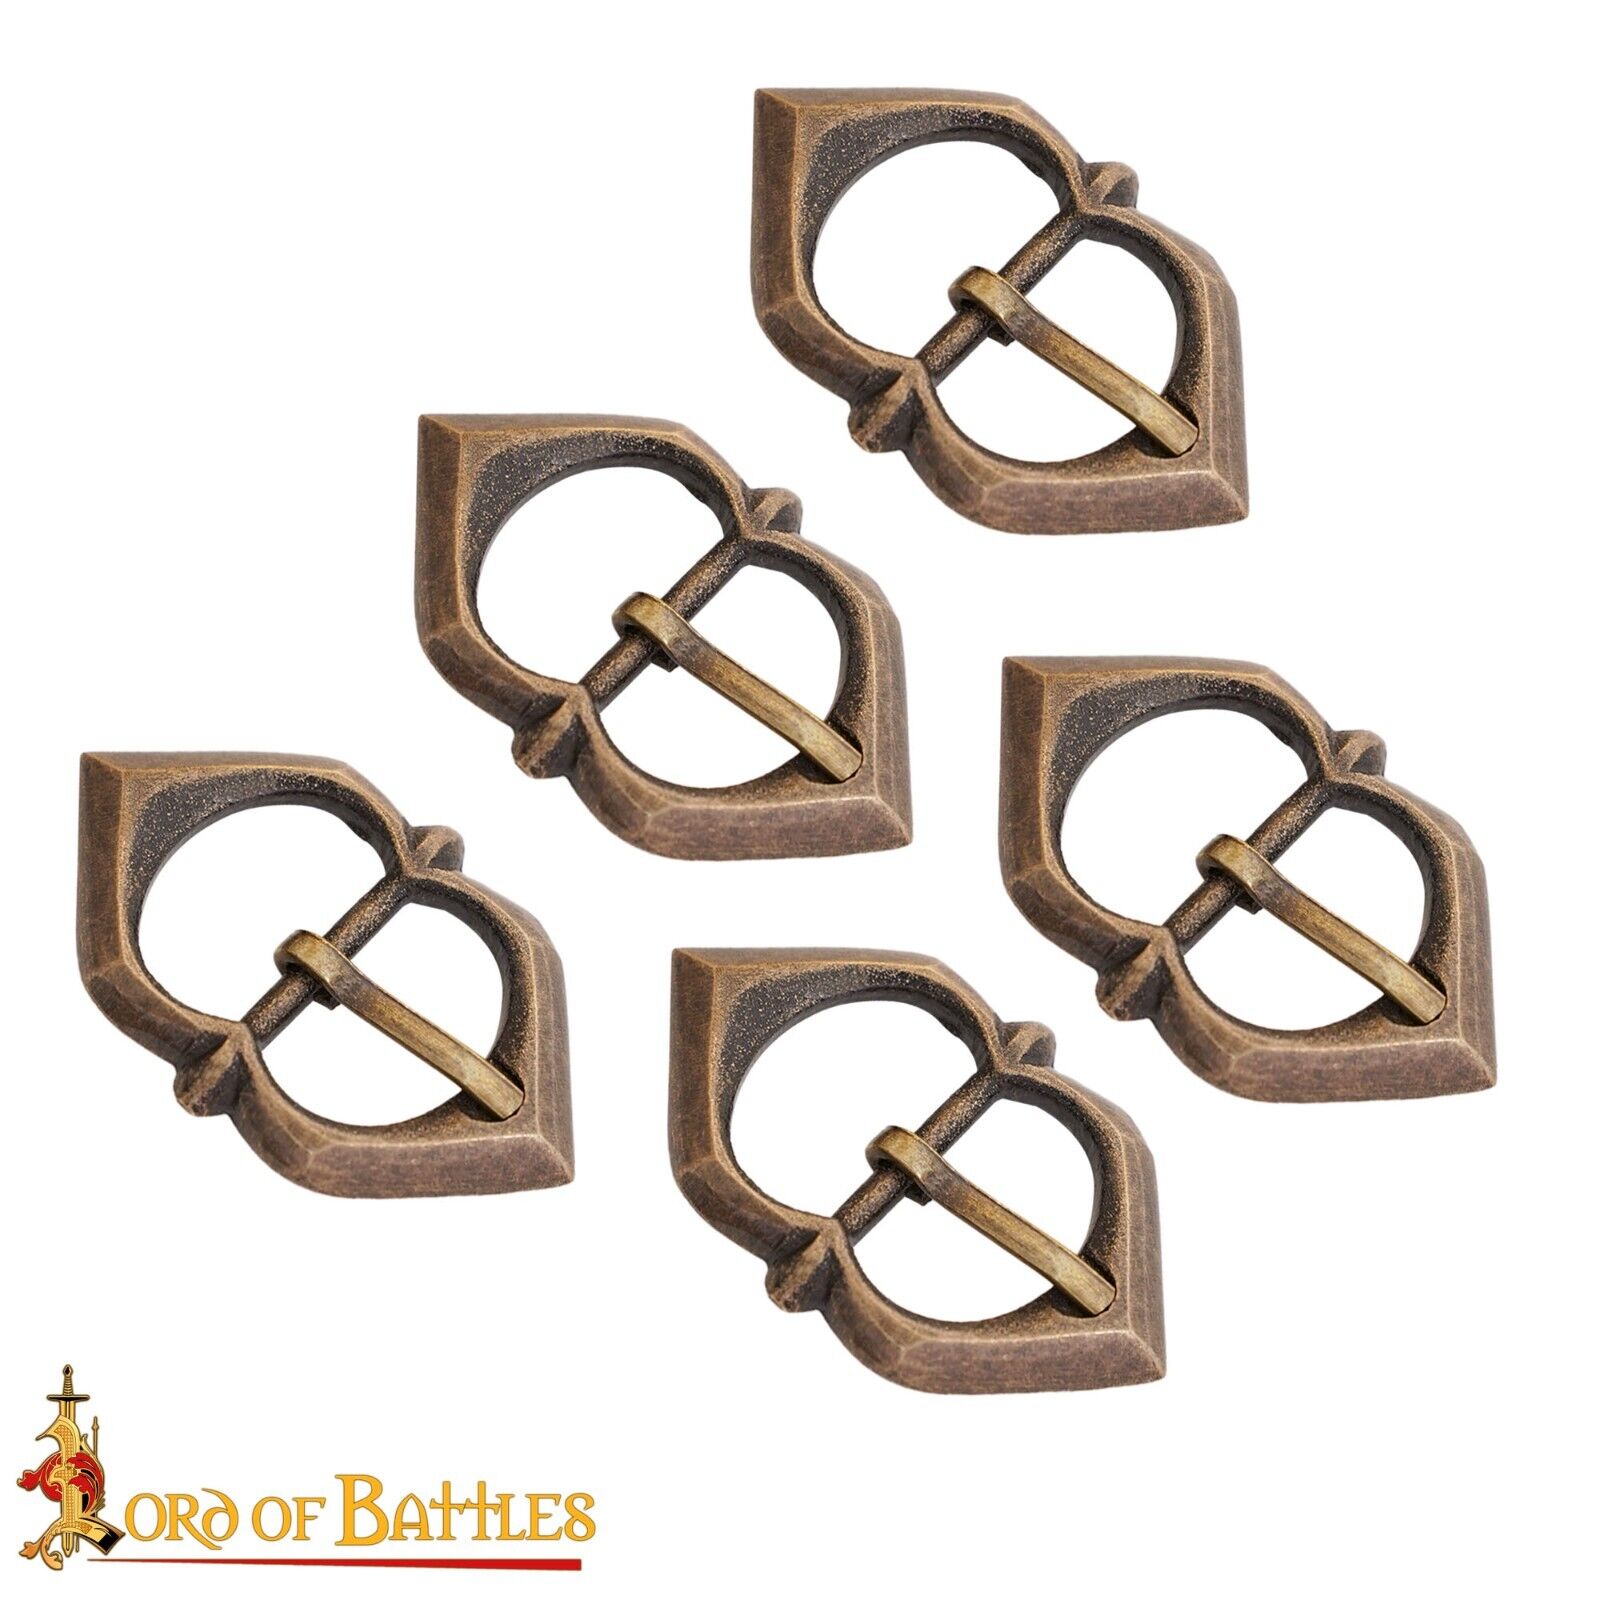 Medieval Belt Brass Buckle Viking Renaissance Cosplay SCA Leather Armor Set of 5